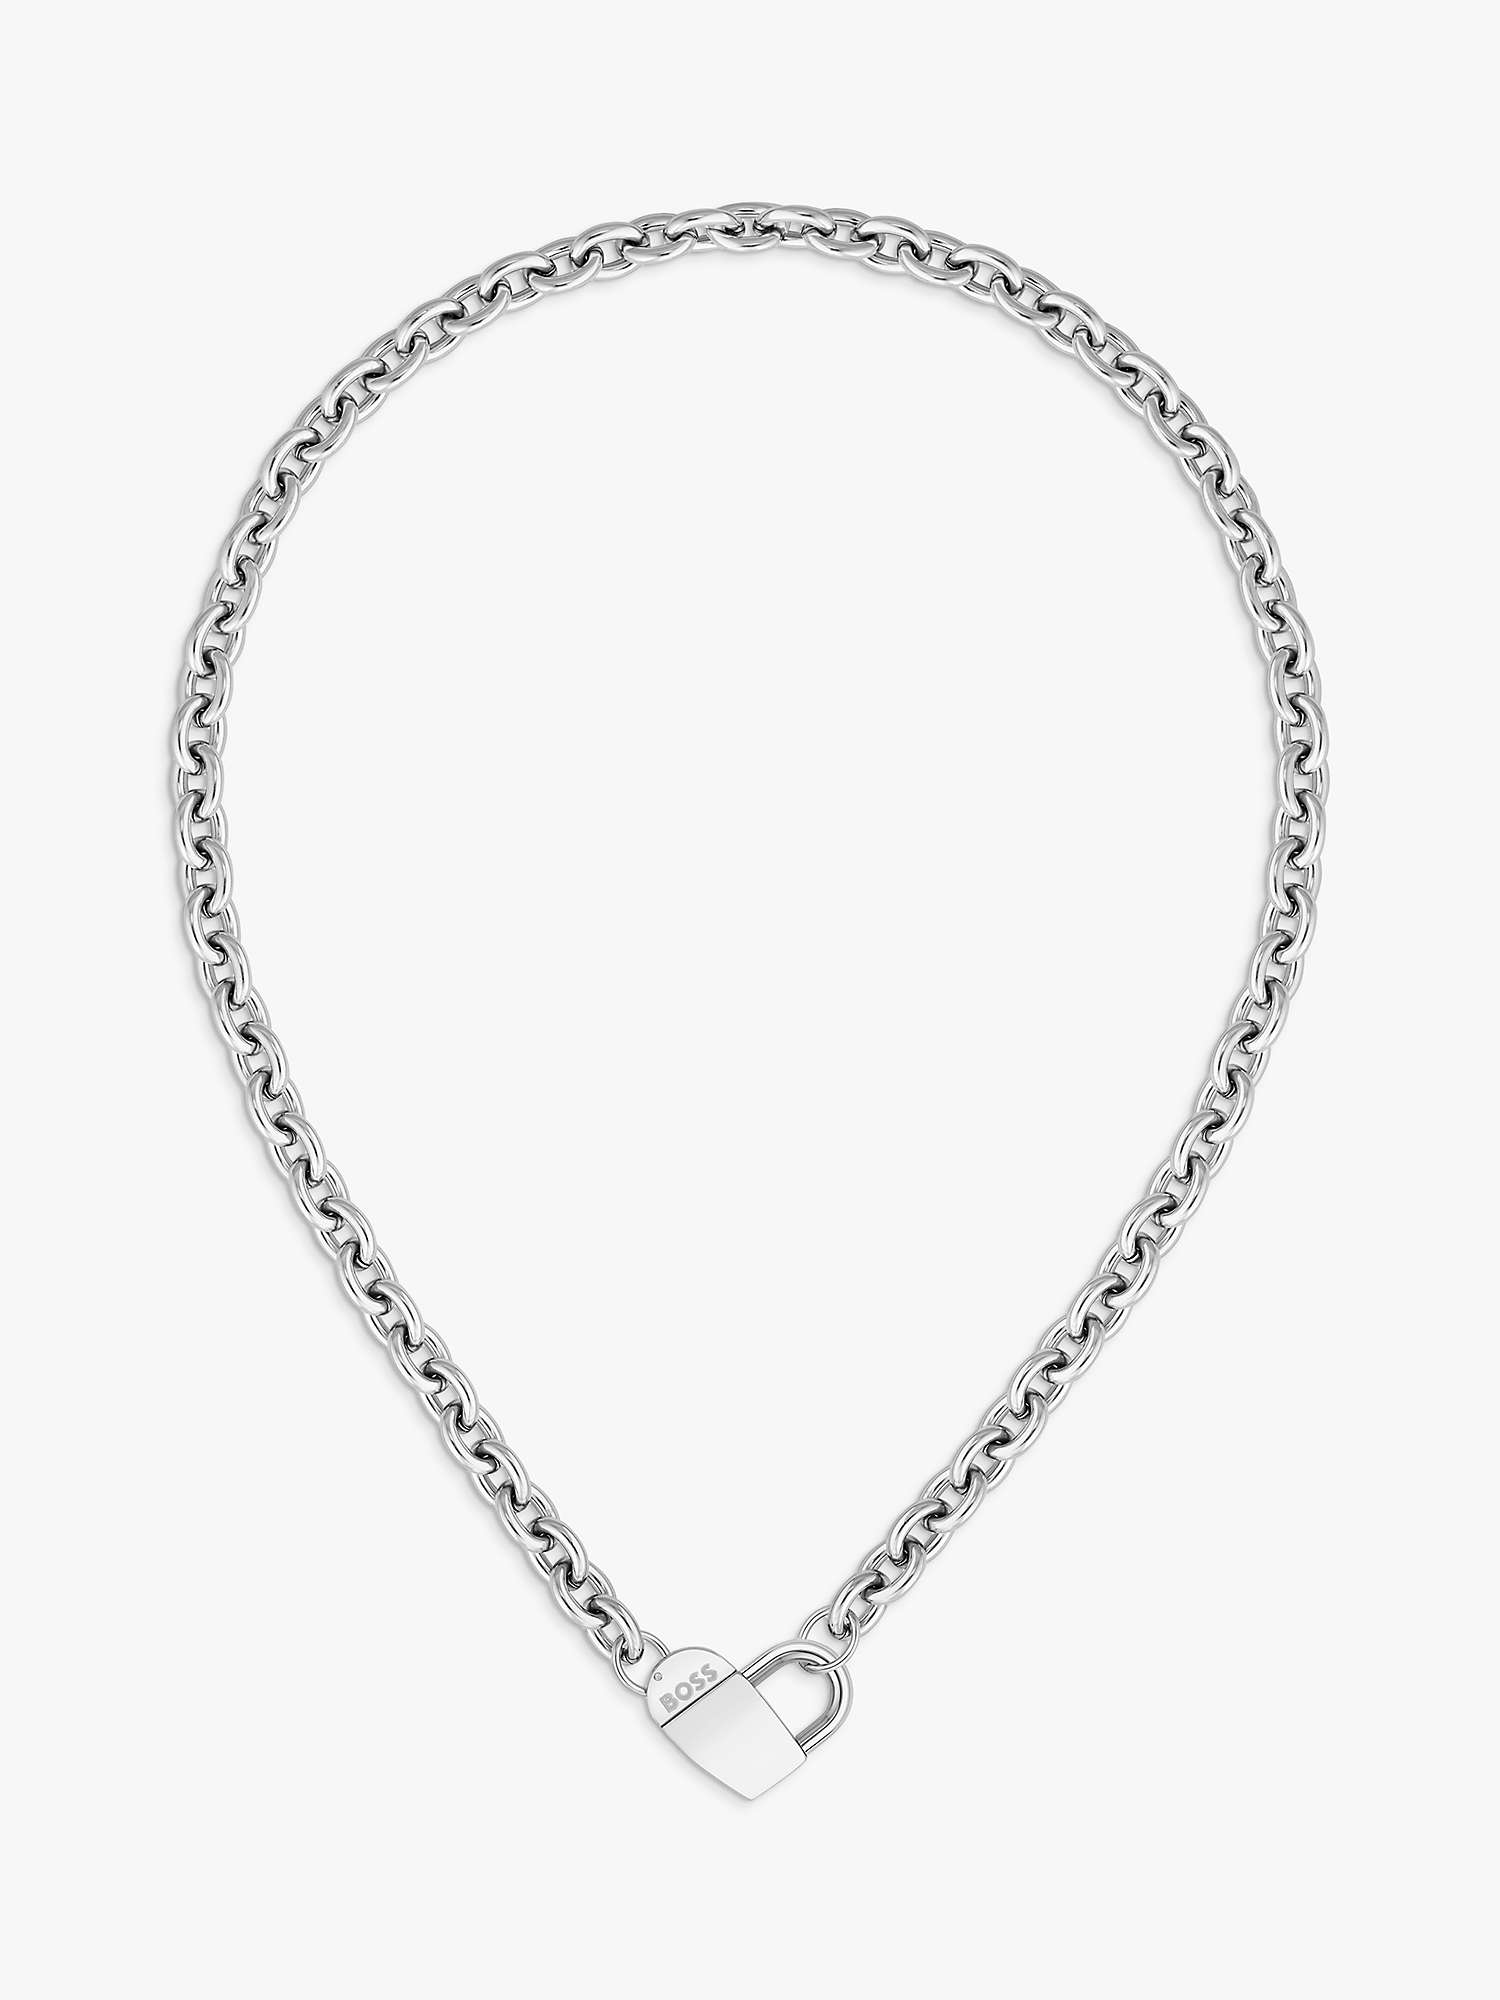 Buy BOSS Dinya Collection Monogram Lock Heart Chain Necklace, Silver Online at johnlewis.com